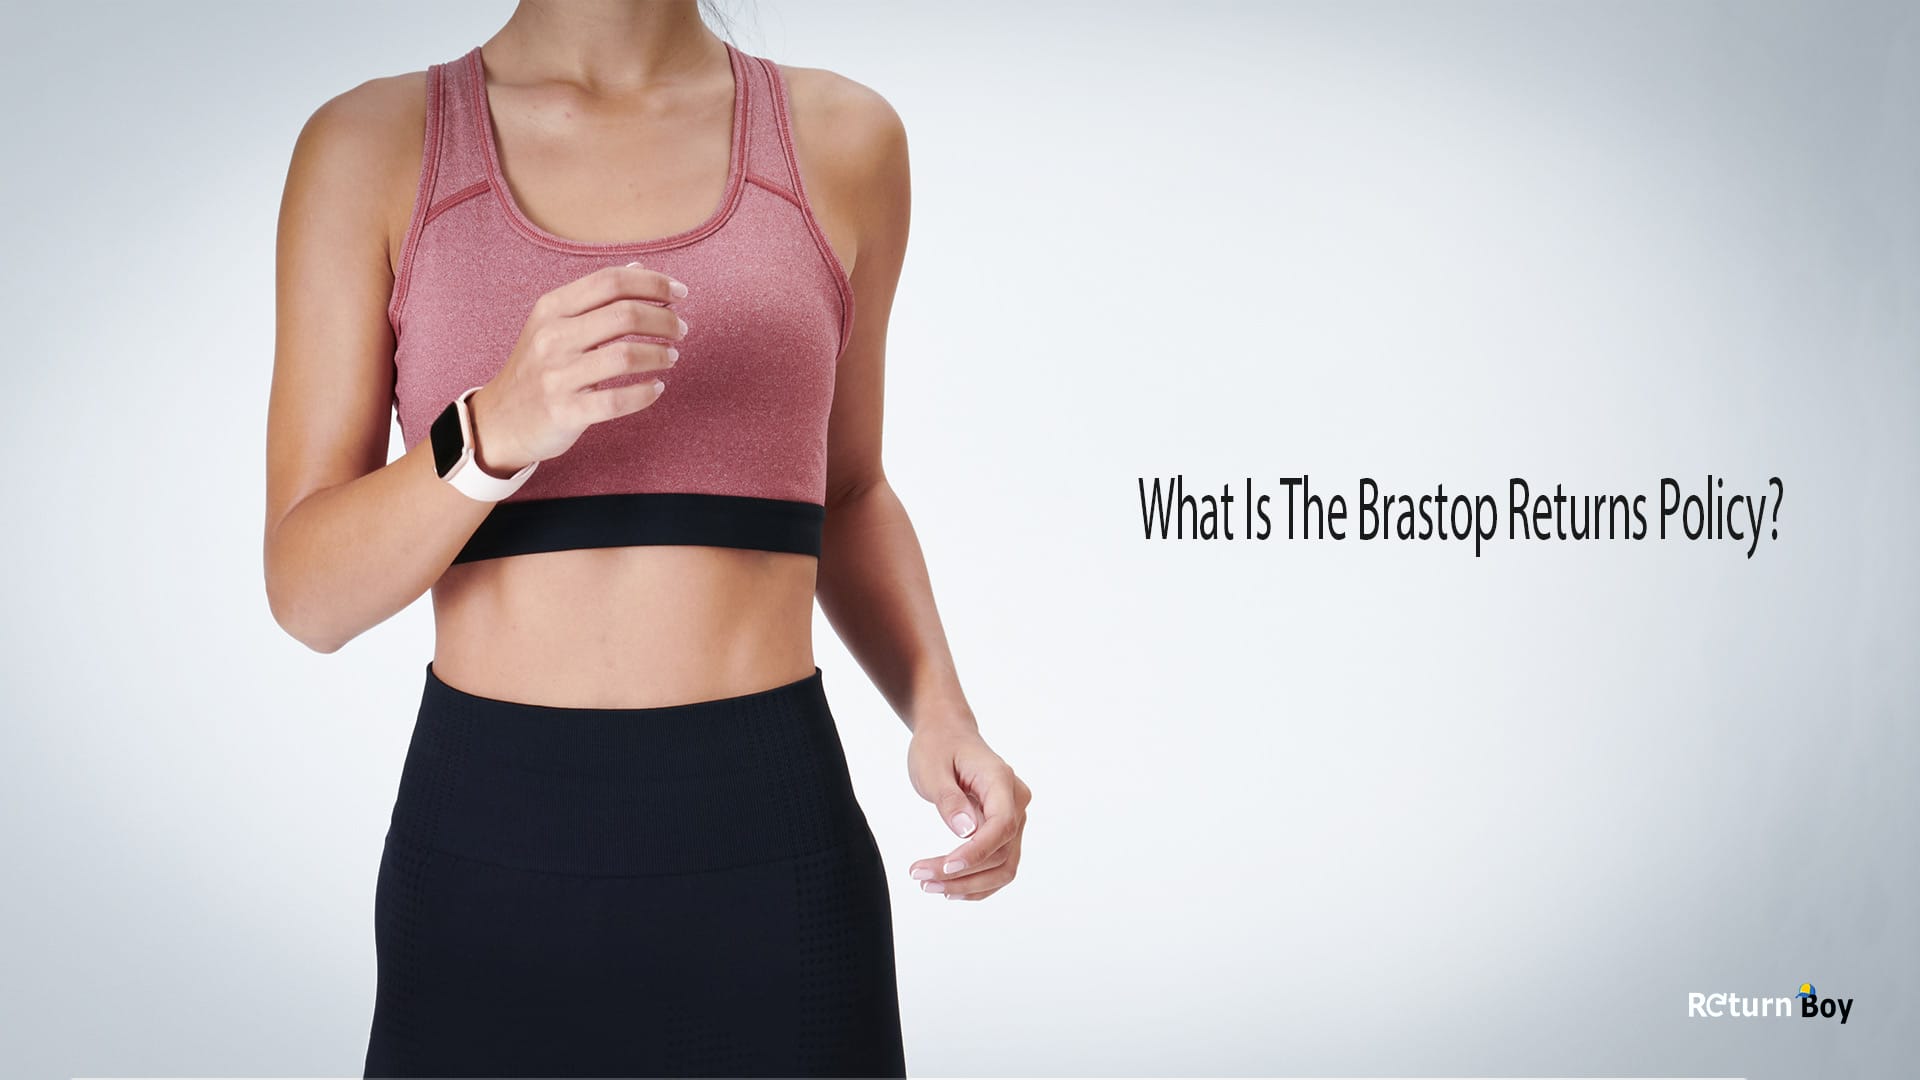 What is the Brastop Returns Policy?